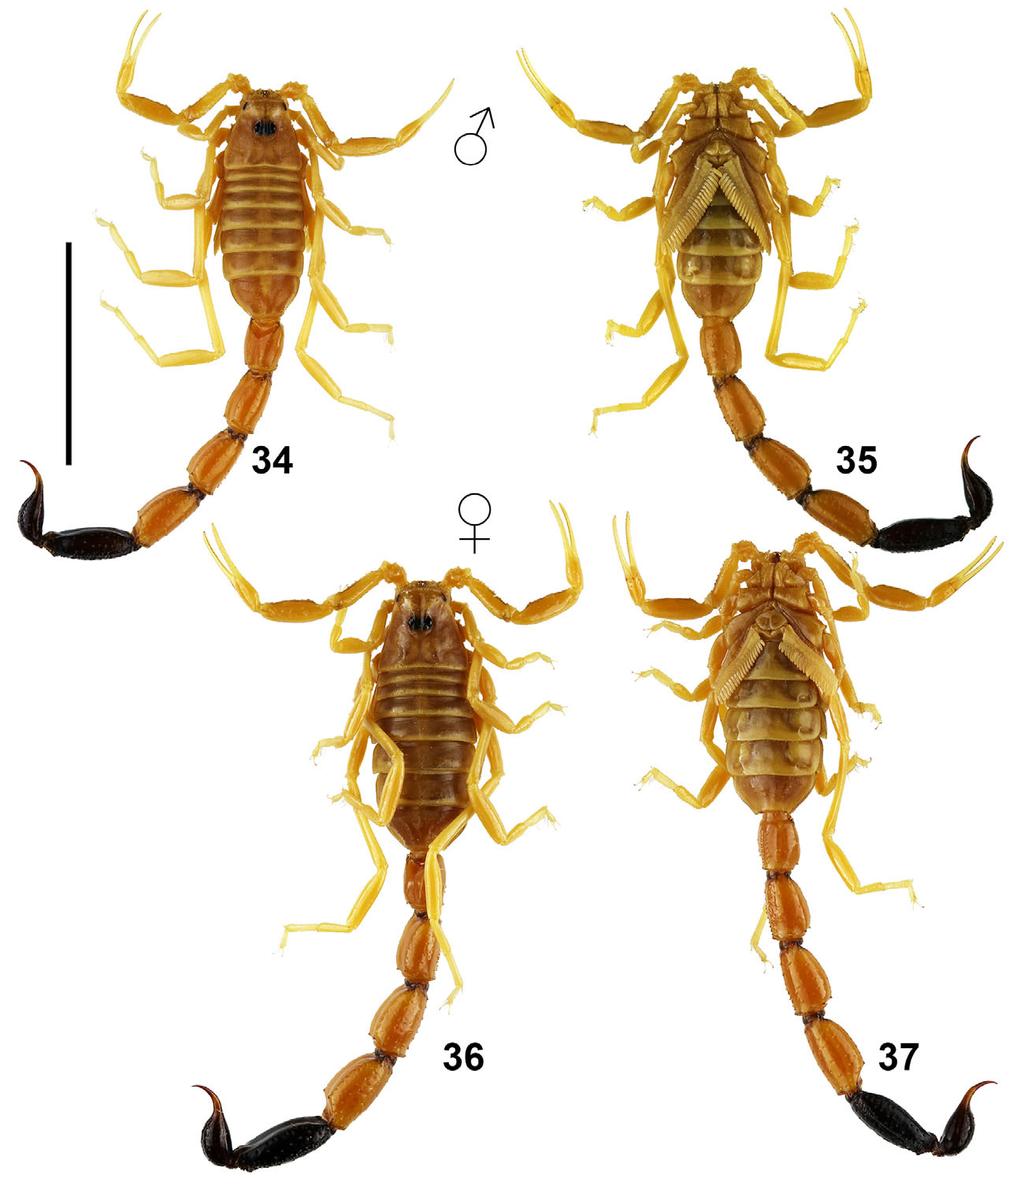 12 Euscorpius 2018, No. 270 Figures 34 37: Anomalobuthus krivochatskyi sp. n., adult male holotype (34 35) and adult female paratopotype (36 37): fullbody views, dorsal (34, 36) and ventral (35, 37).